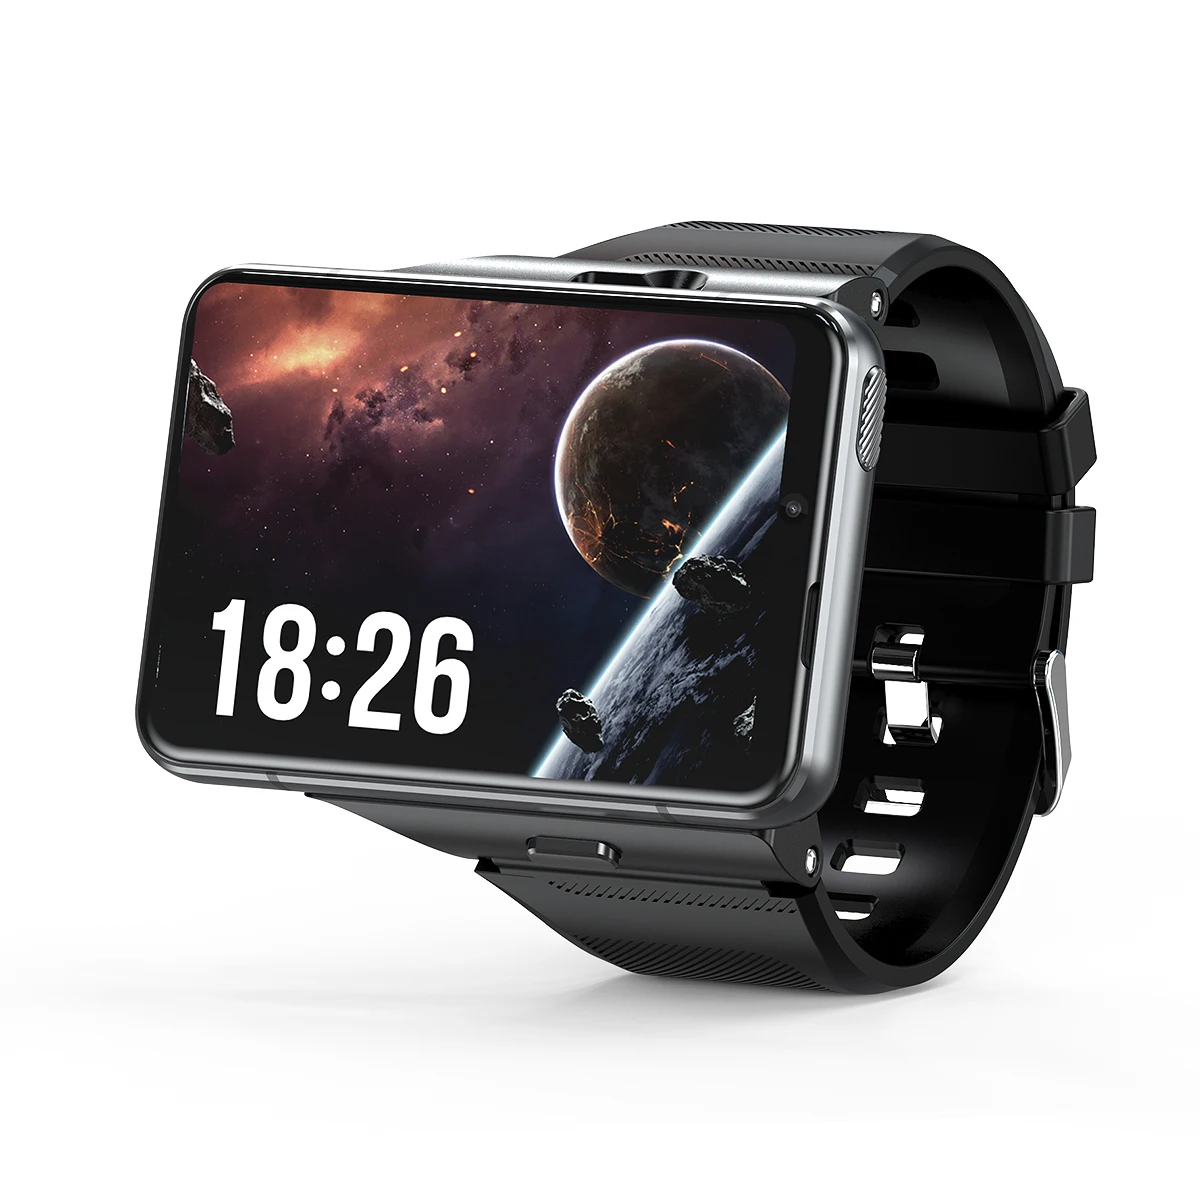 

S999 Smartwatch 2.88 inch 4G Smart Watch Android 9.0 OS 64gb Bluebooth dual Camera 13MP+5MP 480*640 Resolution GPS WiFi pk DM100